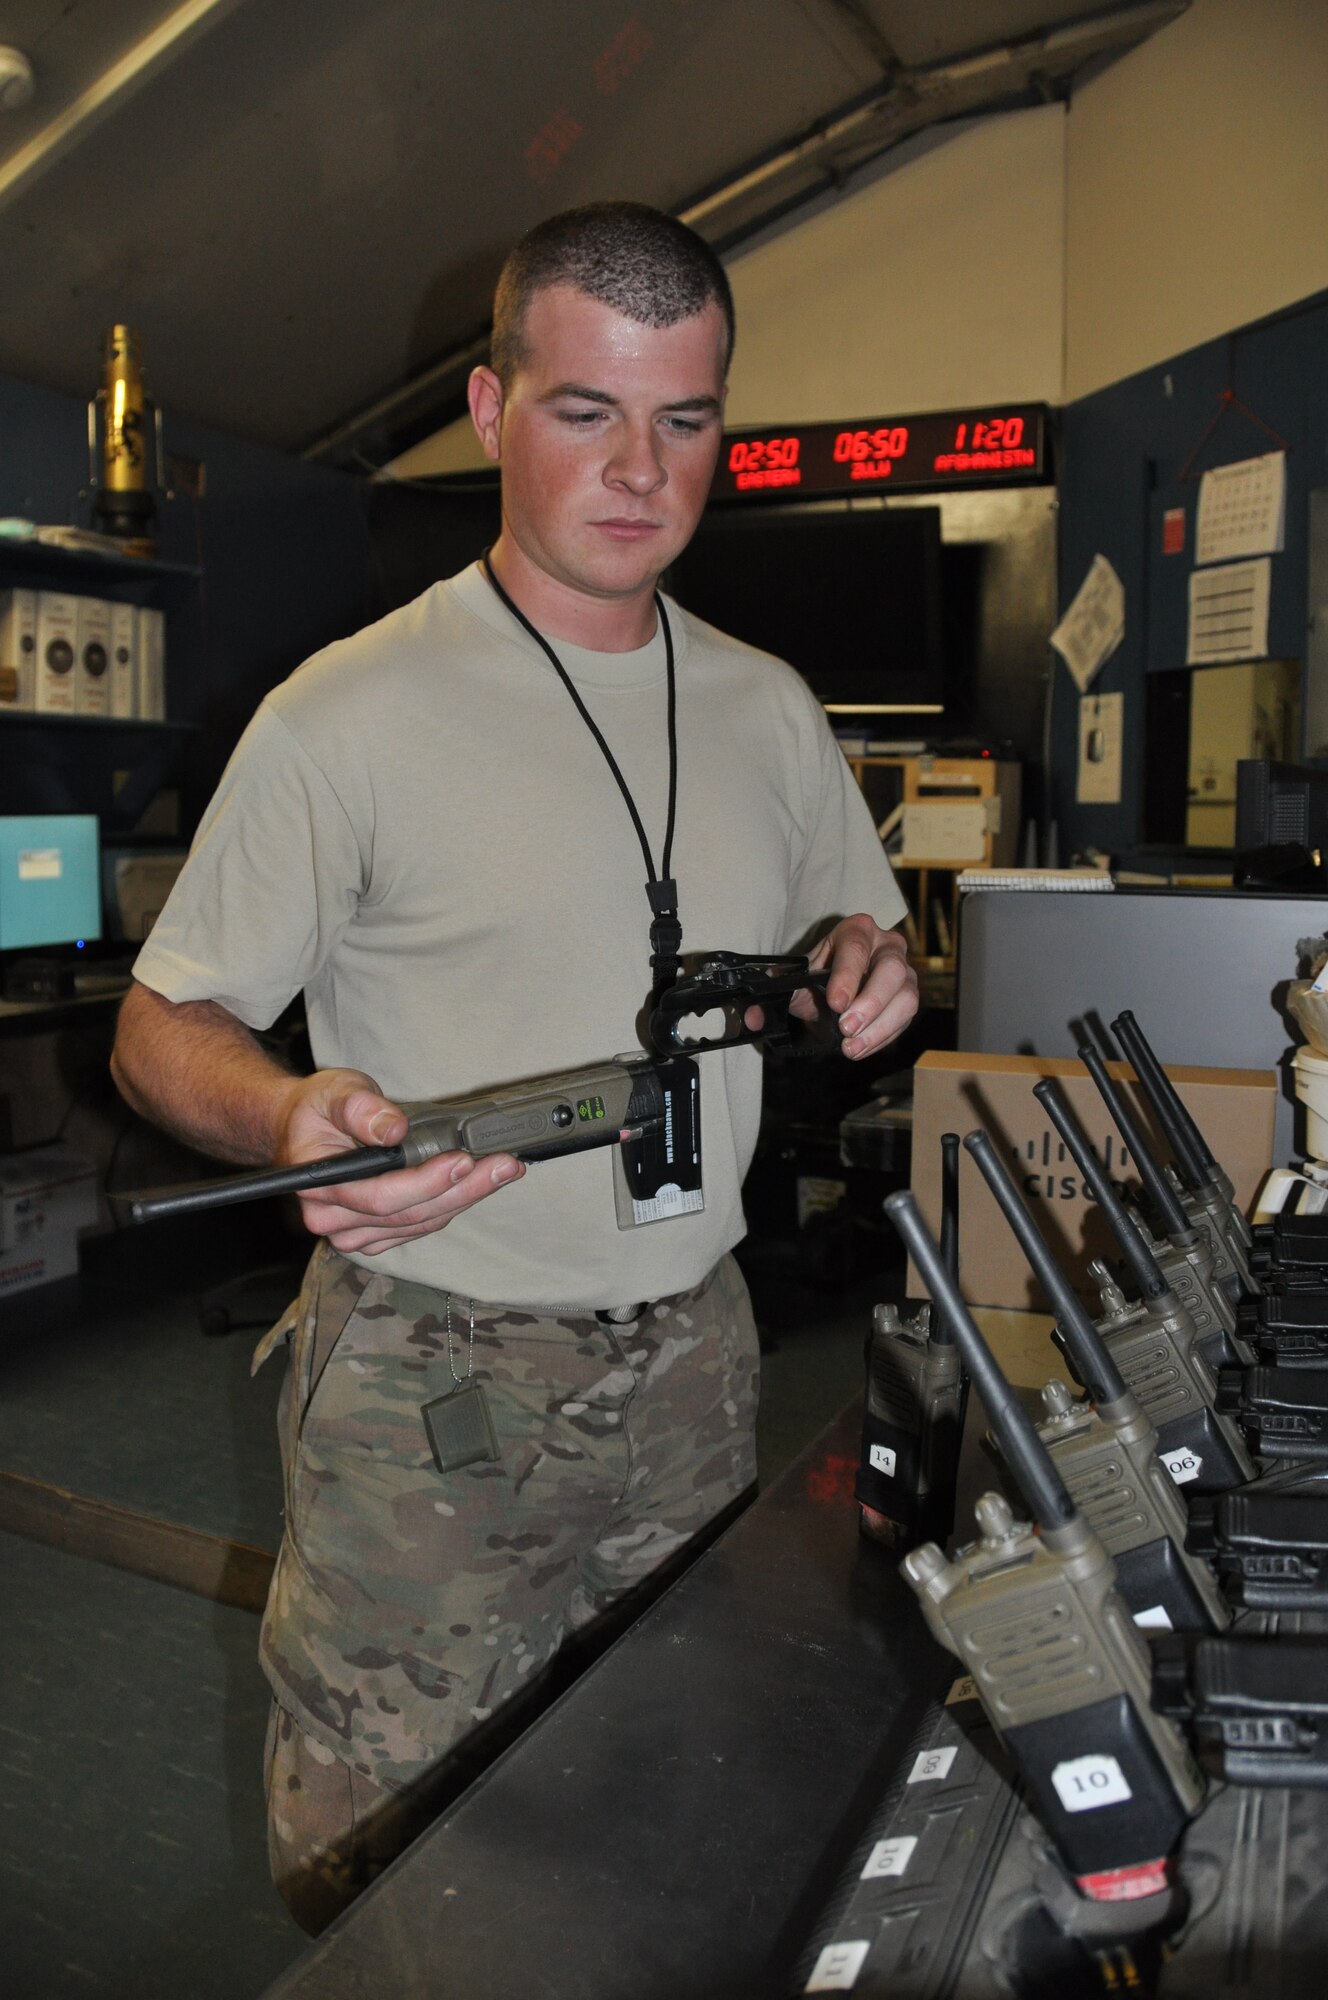 Staff Sgt. Jeffery Quinhoes, 455th Expeditionary Logistics Readiness Squadron fuels service center supervisor, deployed from Ellsworth AFB, S.D., and a native of Bernice, Okla., places a radio in a recharging station in the FSC at Bagram Airfield, Afghanistan, Sept. 18, 2013. The FSC tracks inventories to ensure fuel is available to meet air tasking order requirements and maintains accountability of its personnel, which are vital to sustaining operations with the periodic rocket here. (U.S. Air Force photo/Tech. Sgt. Rob Hazelett)